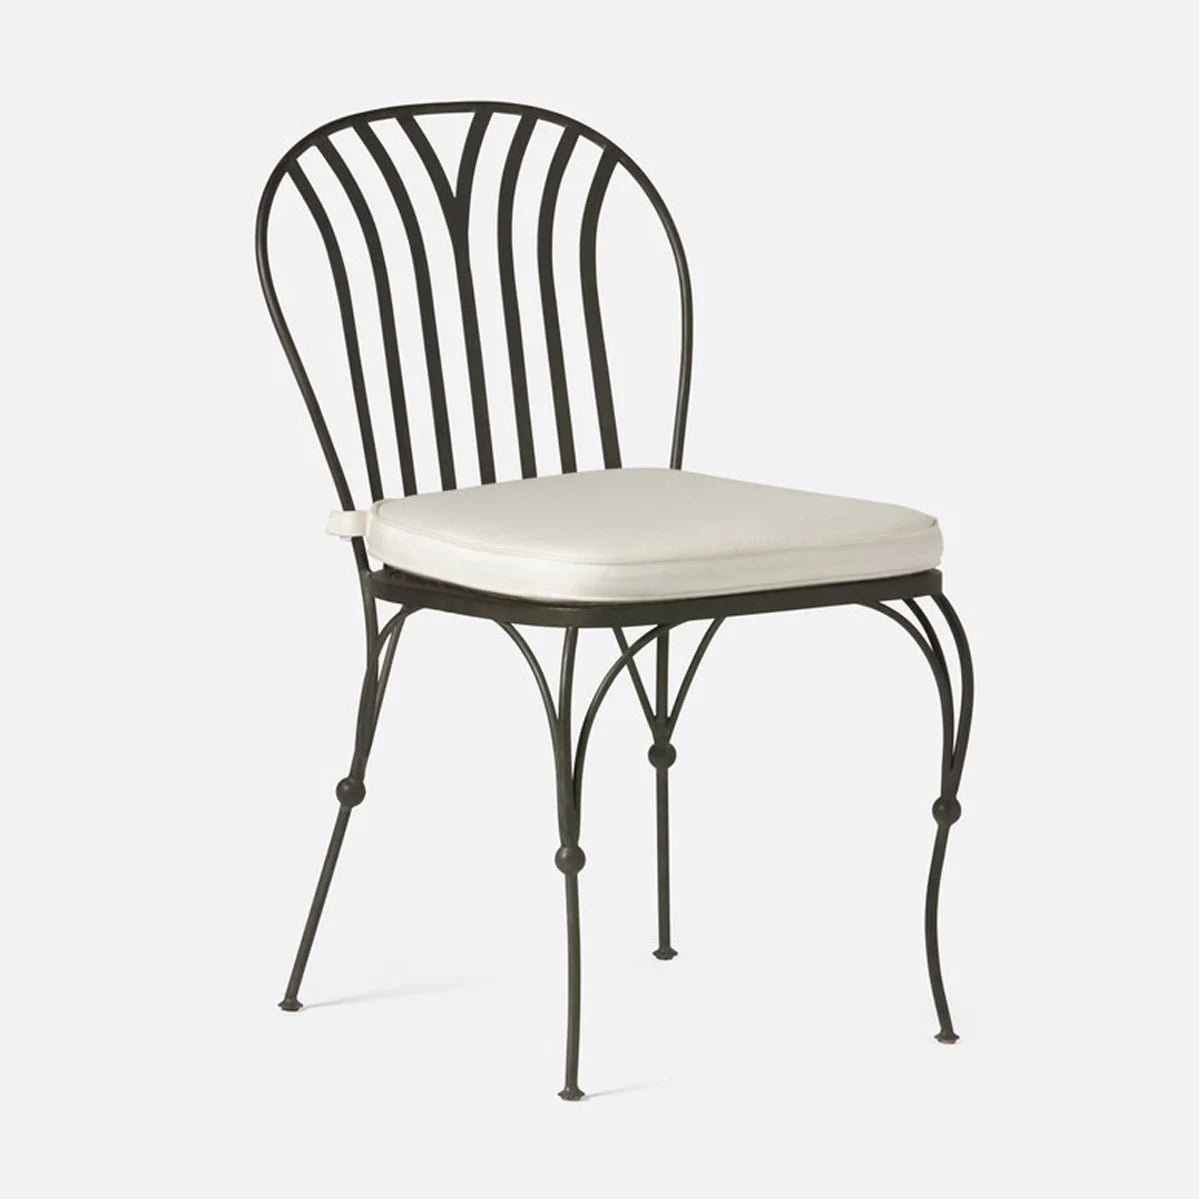 Made Goods Shayne Outdoor Dining Chair in Clyde Fabric